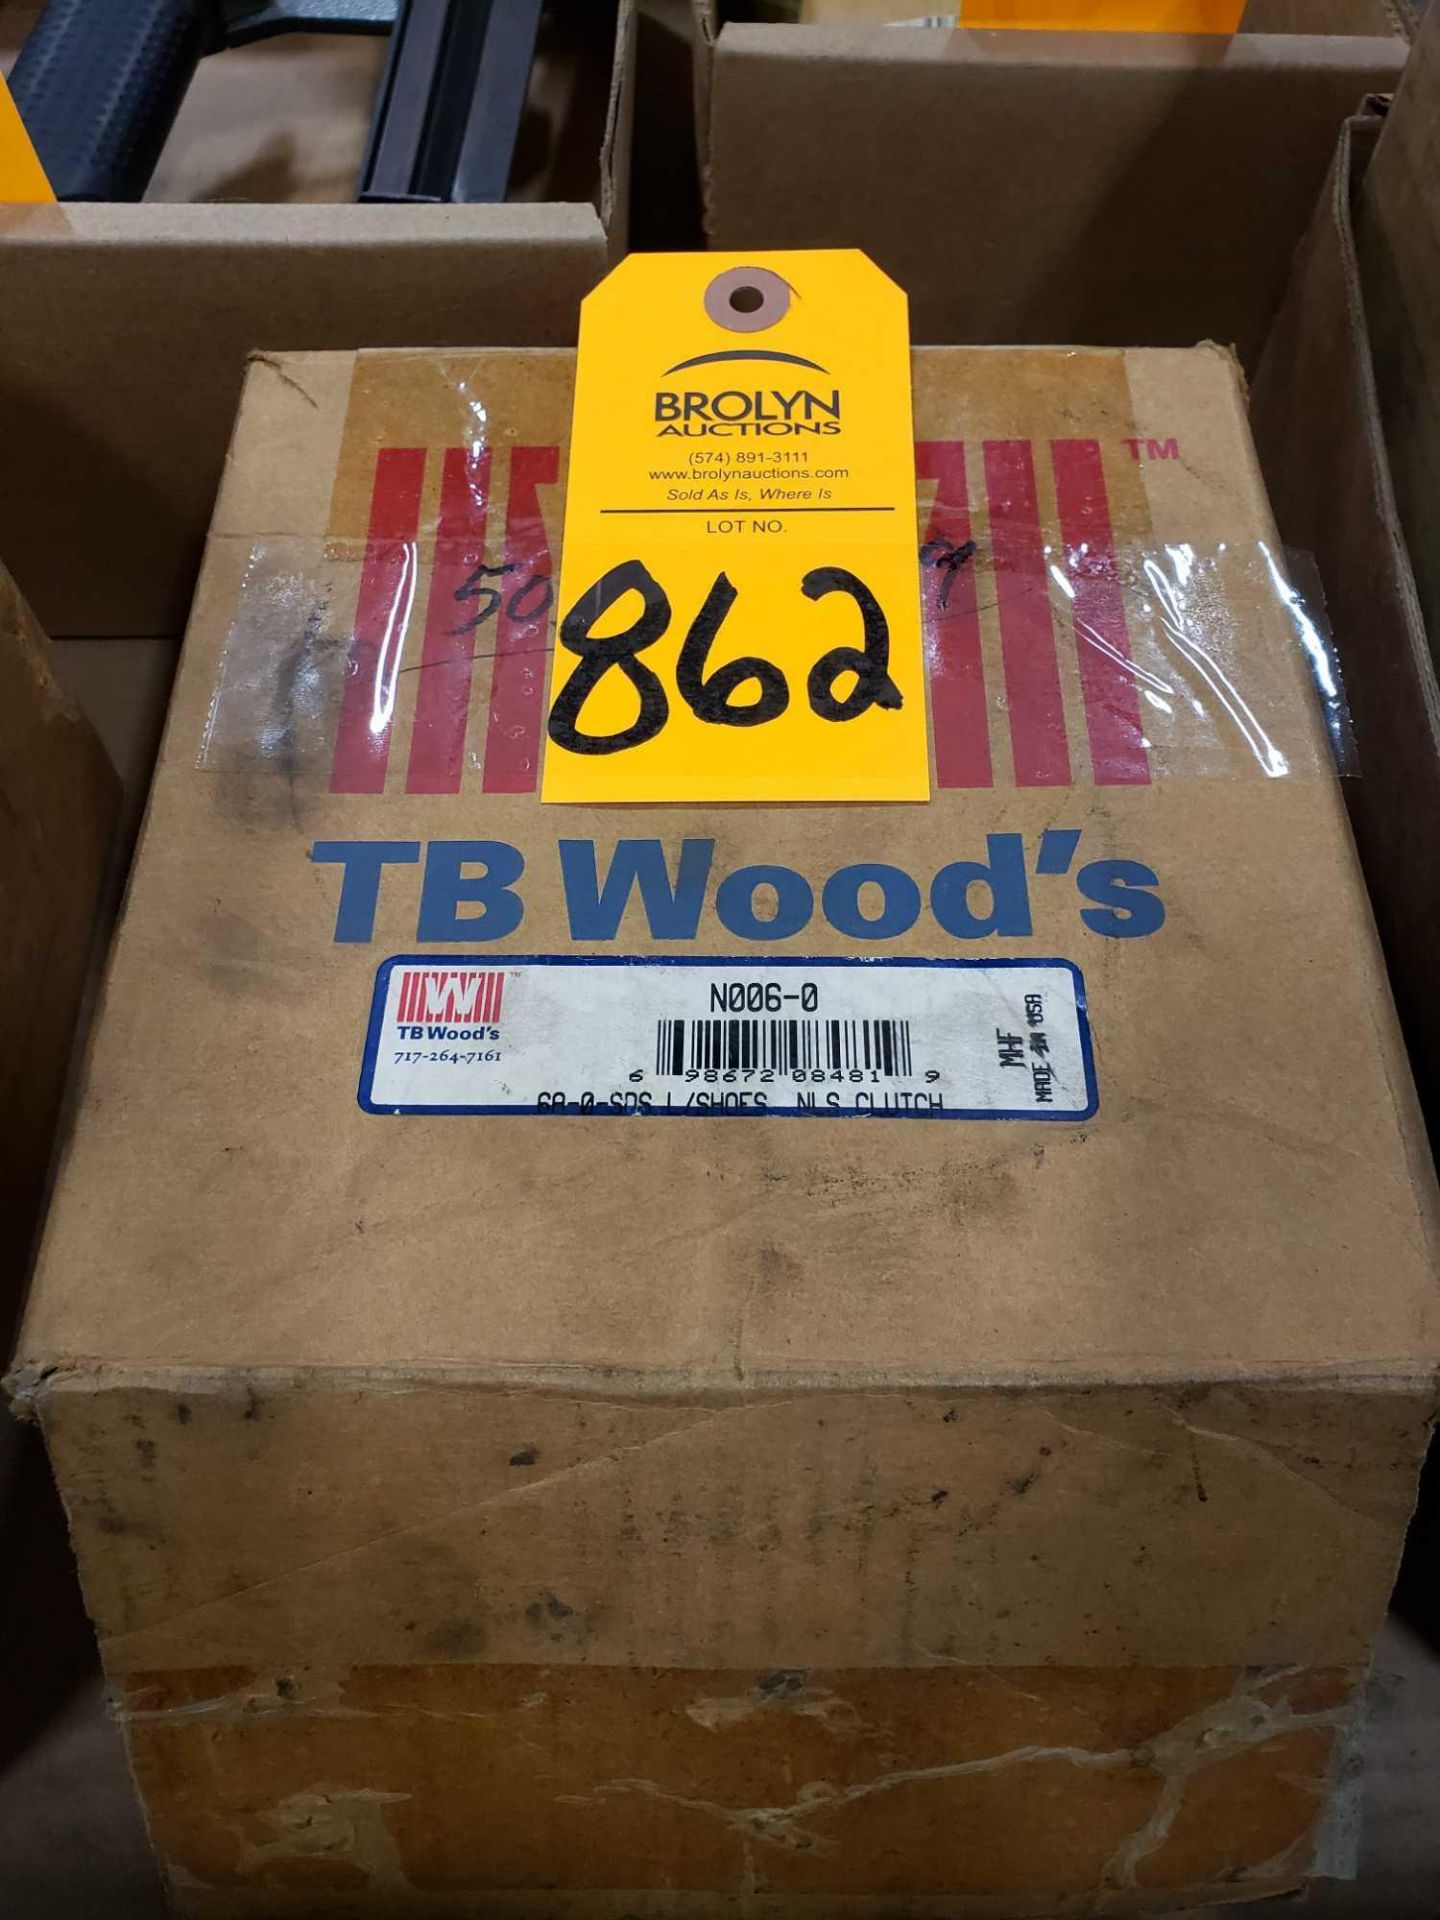 TB woods clutch shoes model N006-0. New in box.